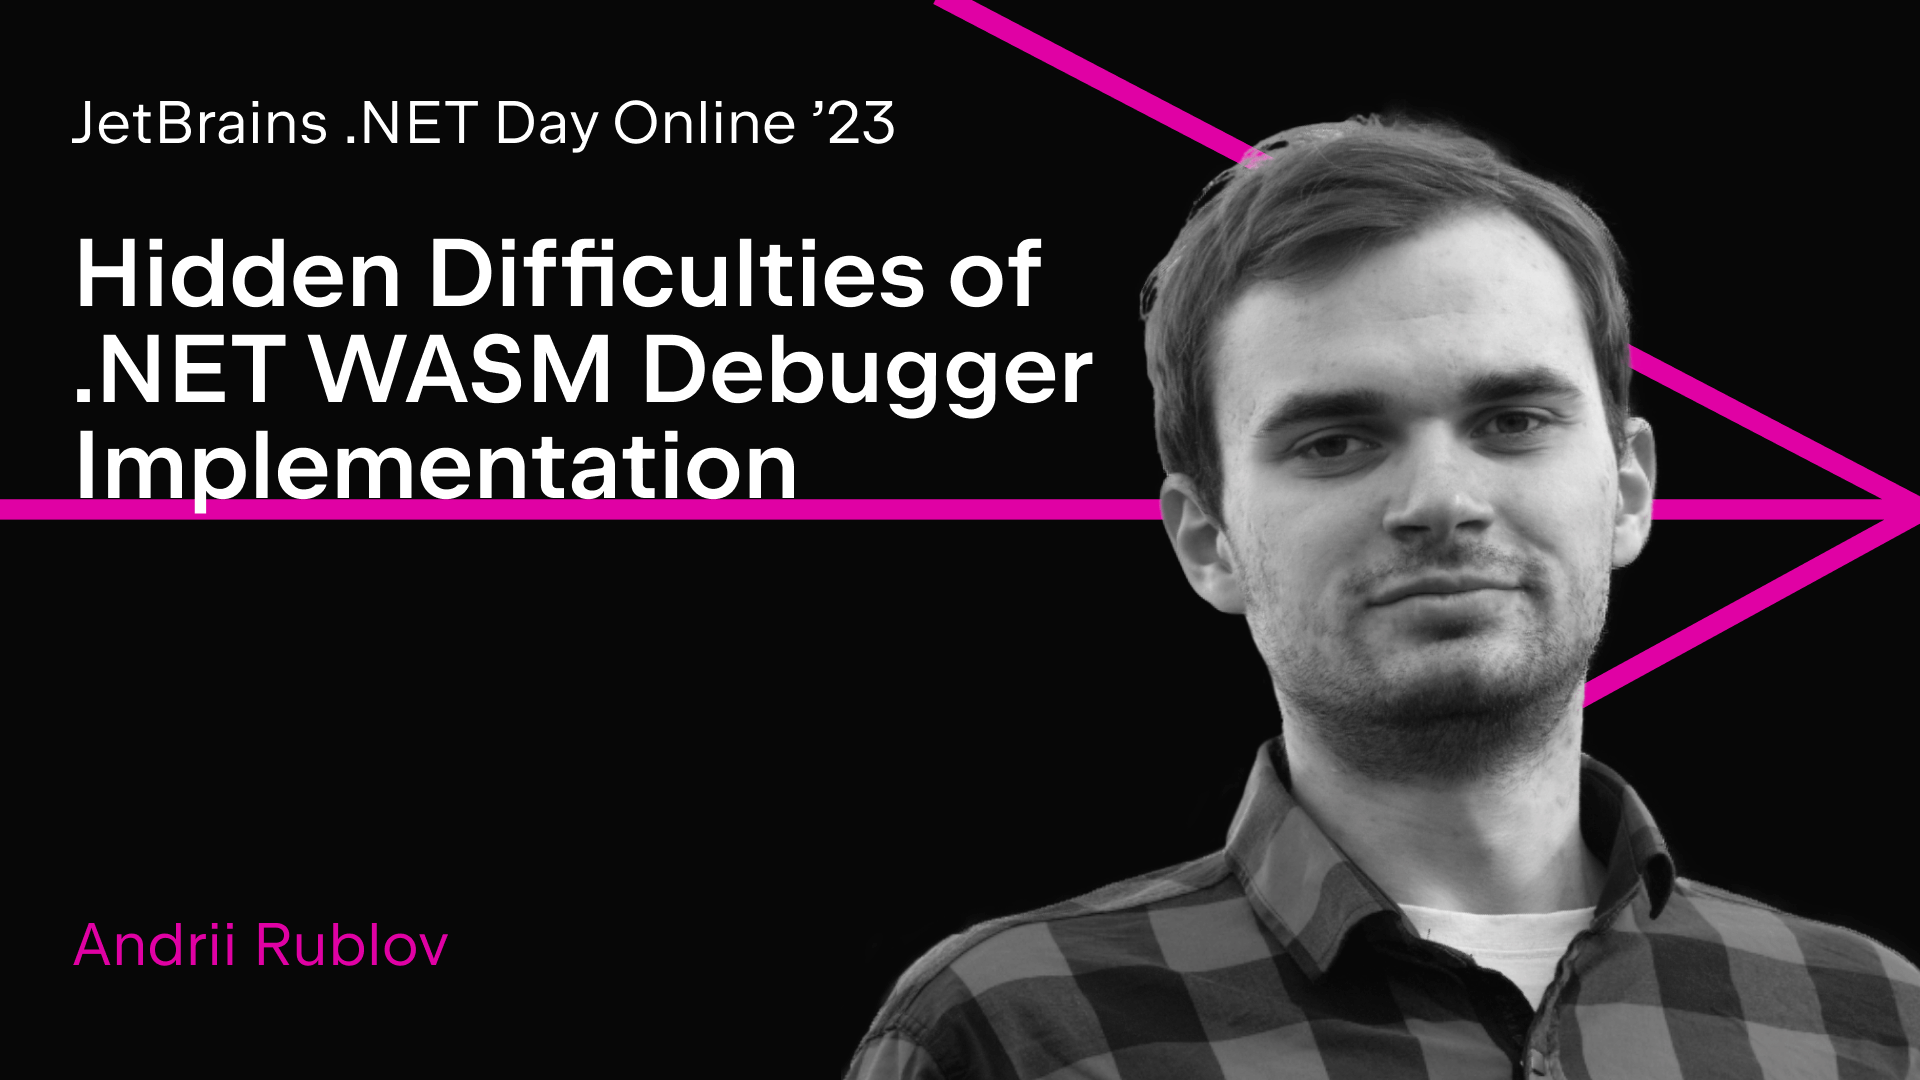 Hidden Difficulties of Debugger Implementation for .NET WASM Apps